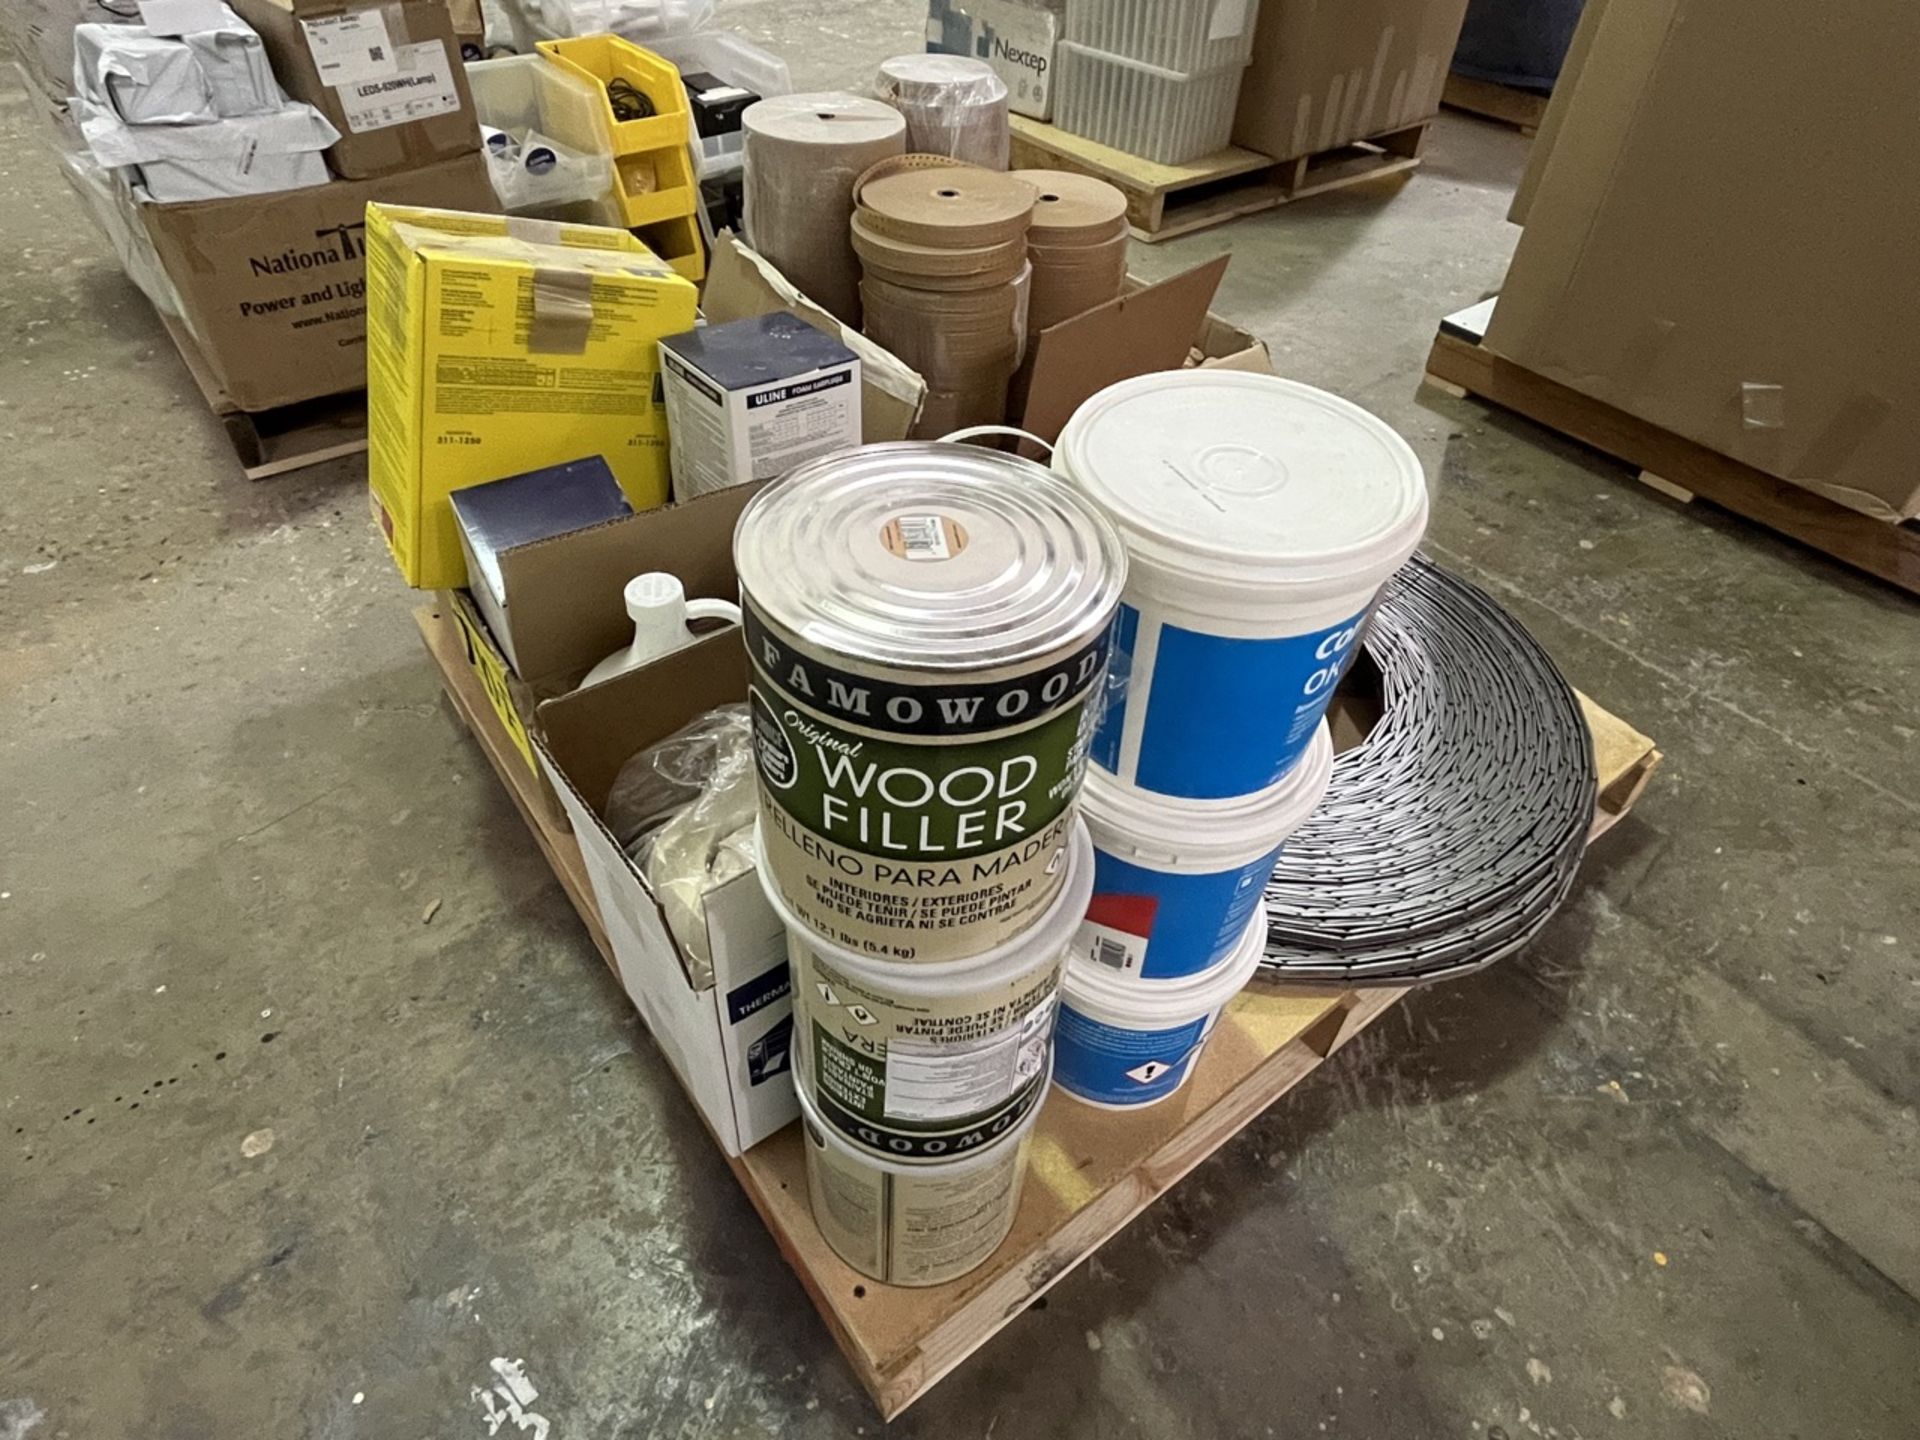 (NEW) Pallet with diverse feedstock contains: 5 gallons of drywall filler, 3 gallons of wood fille - Image 5 of 14